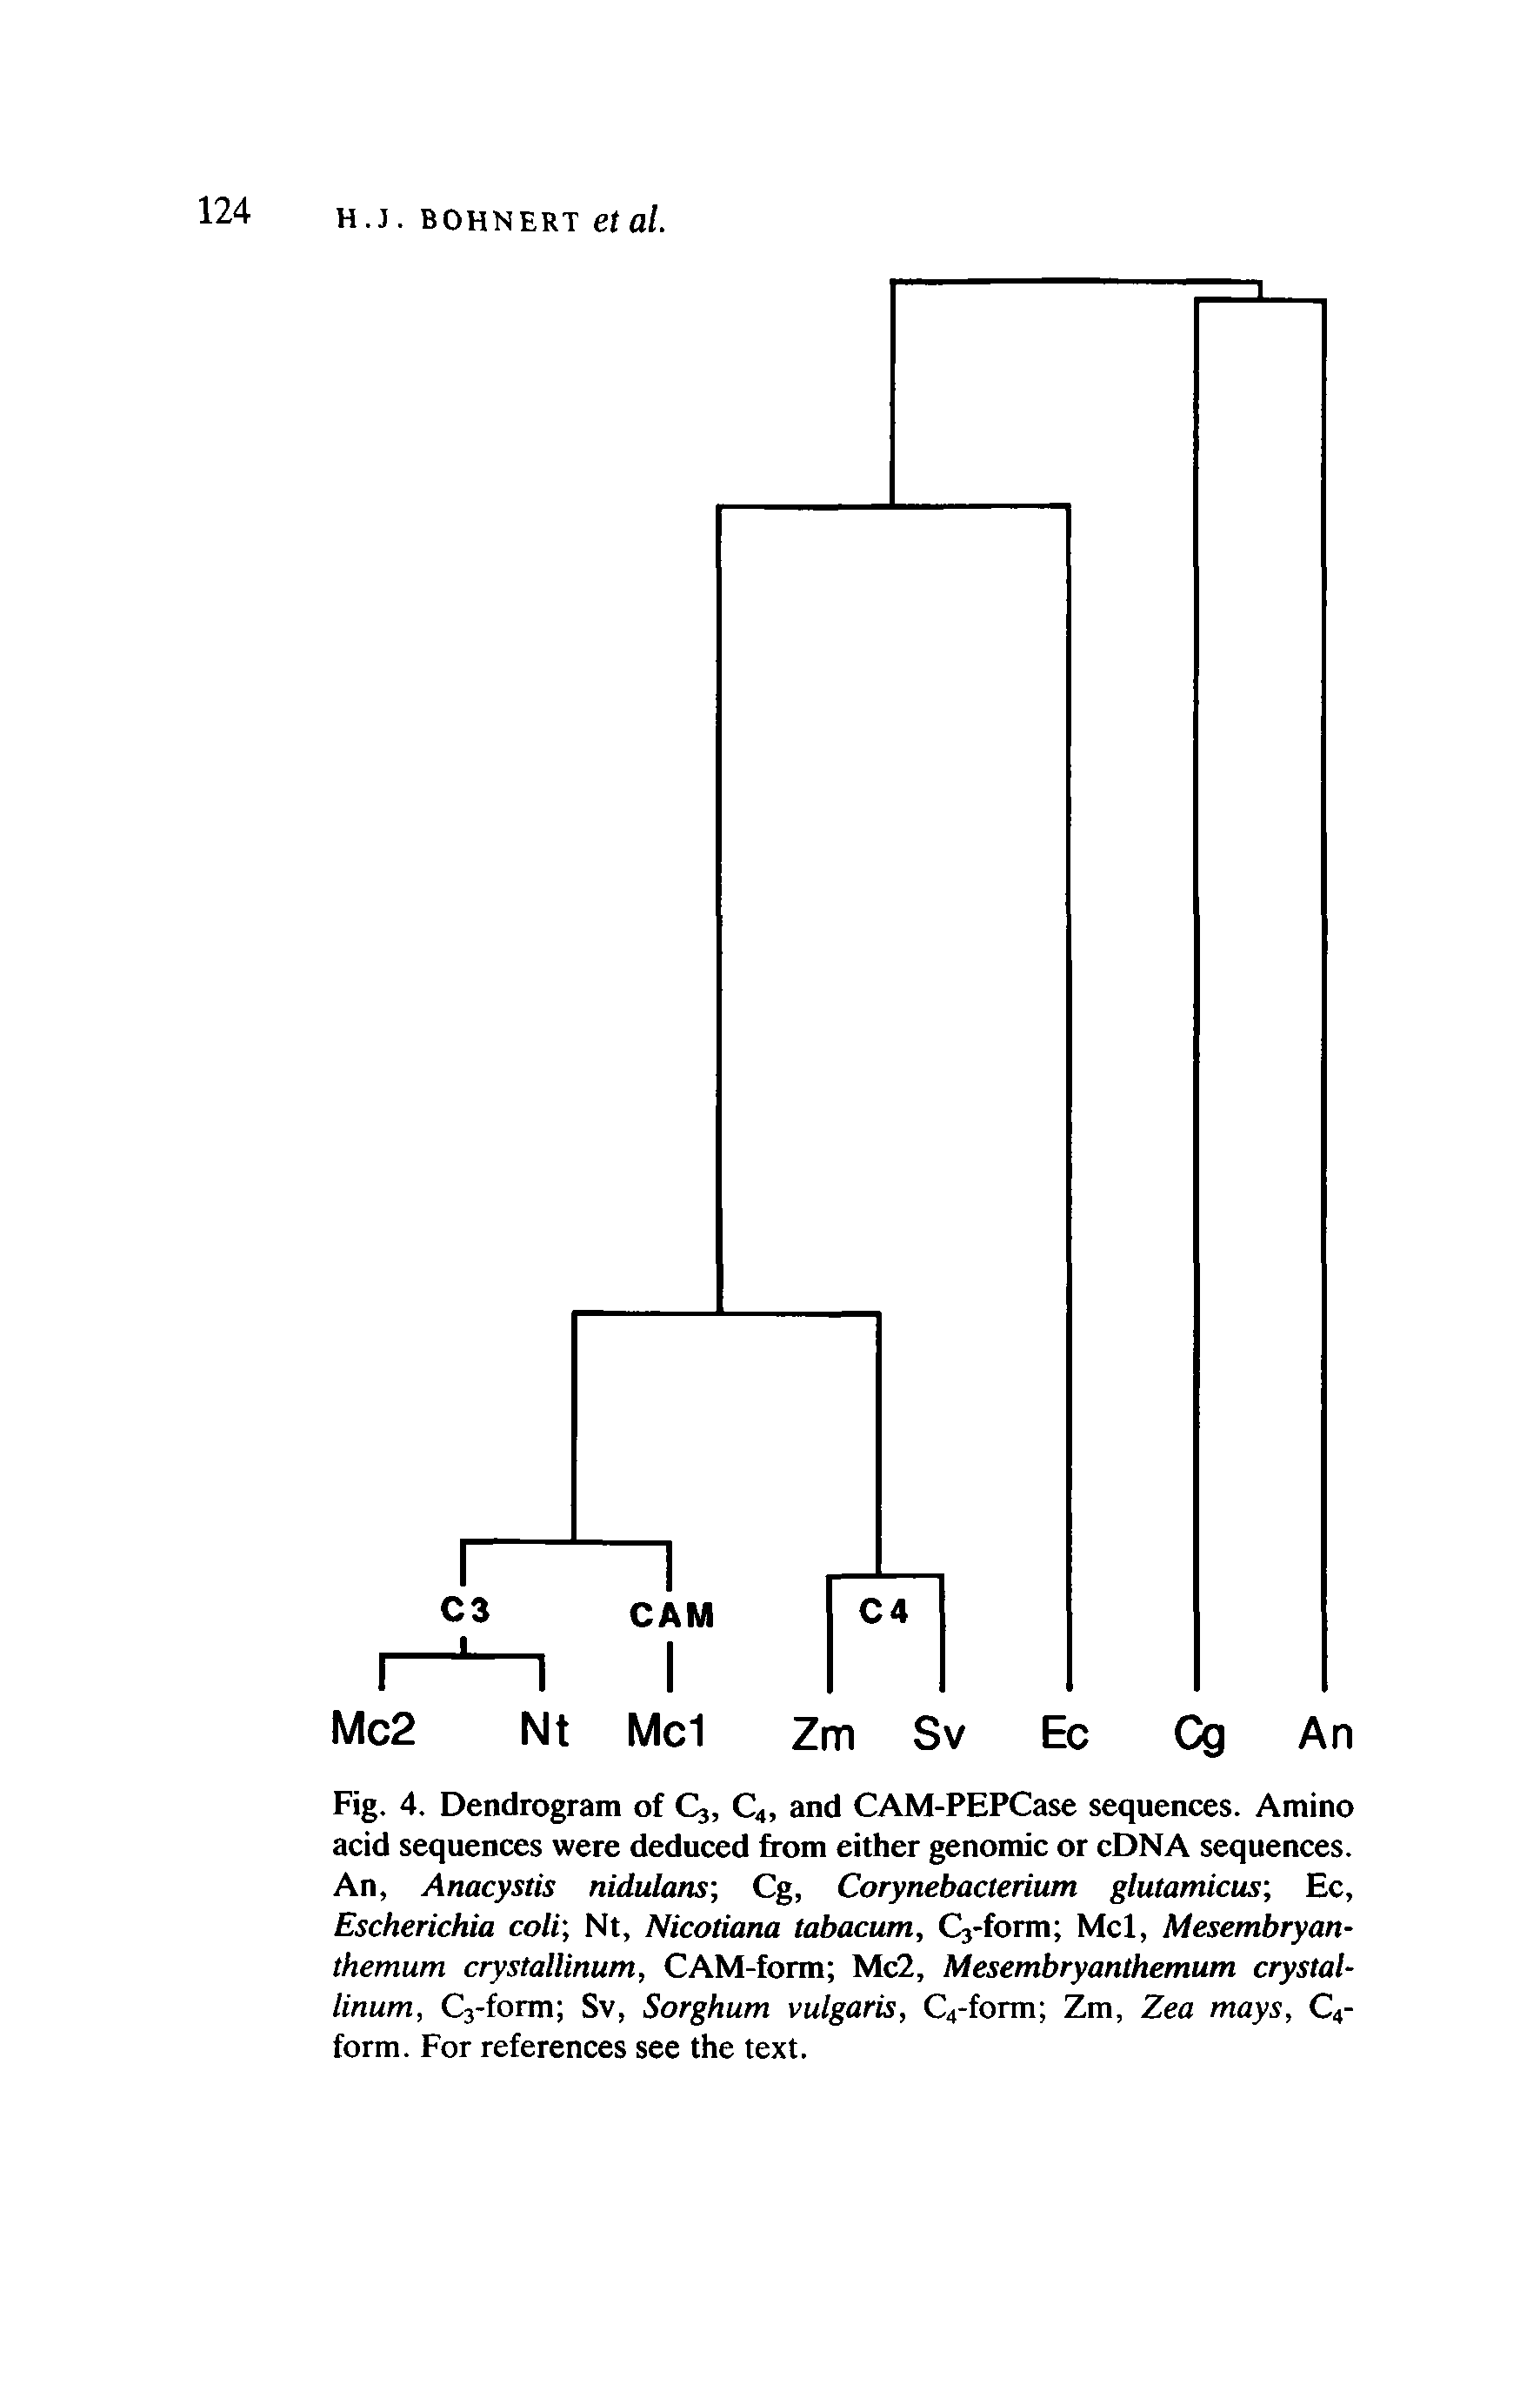 Fig. 4. Dendrogram of Q, C4, and CAM-PEPCase sequences. Amino acid sequences were deduced from either genomic or cDNA sequences. An, Anacystis nidulans Cg, Corynebaclerium glutamicus Ec, Escherichia coli Nt, Nicotiana tabacum, Q-form Mcl, Mesembryan-themum crystattinum, CAM-form Mc2, Mesembryanthemum crystal-linum, C3-form Sv, Sorghum vulgaris, C4-form Zm, Zea mays, C4-form. For references see the text.